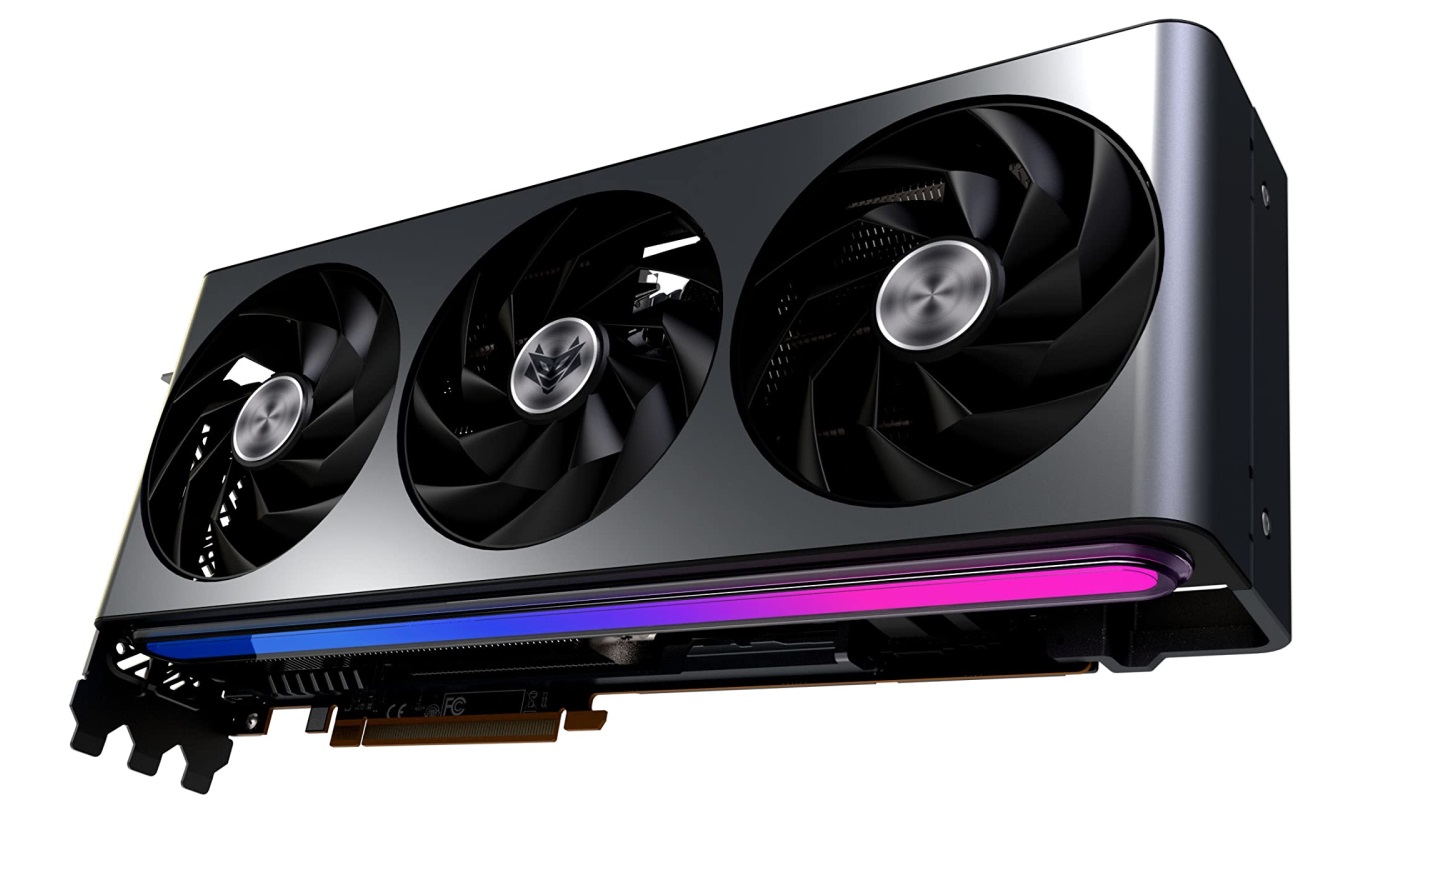 Sapphire issues warning about scam GPU offers on Amazon - OC3D